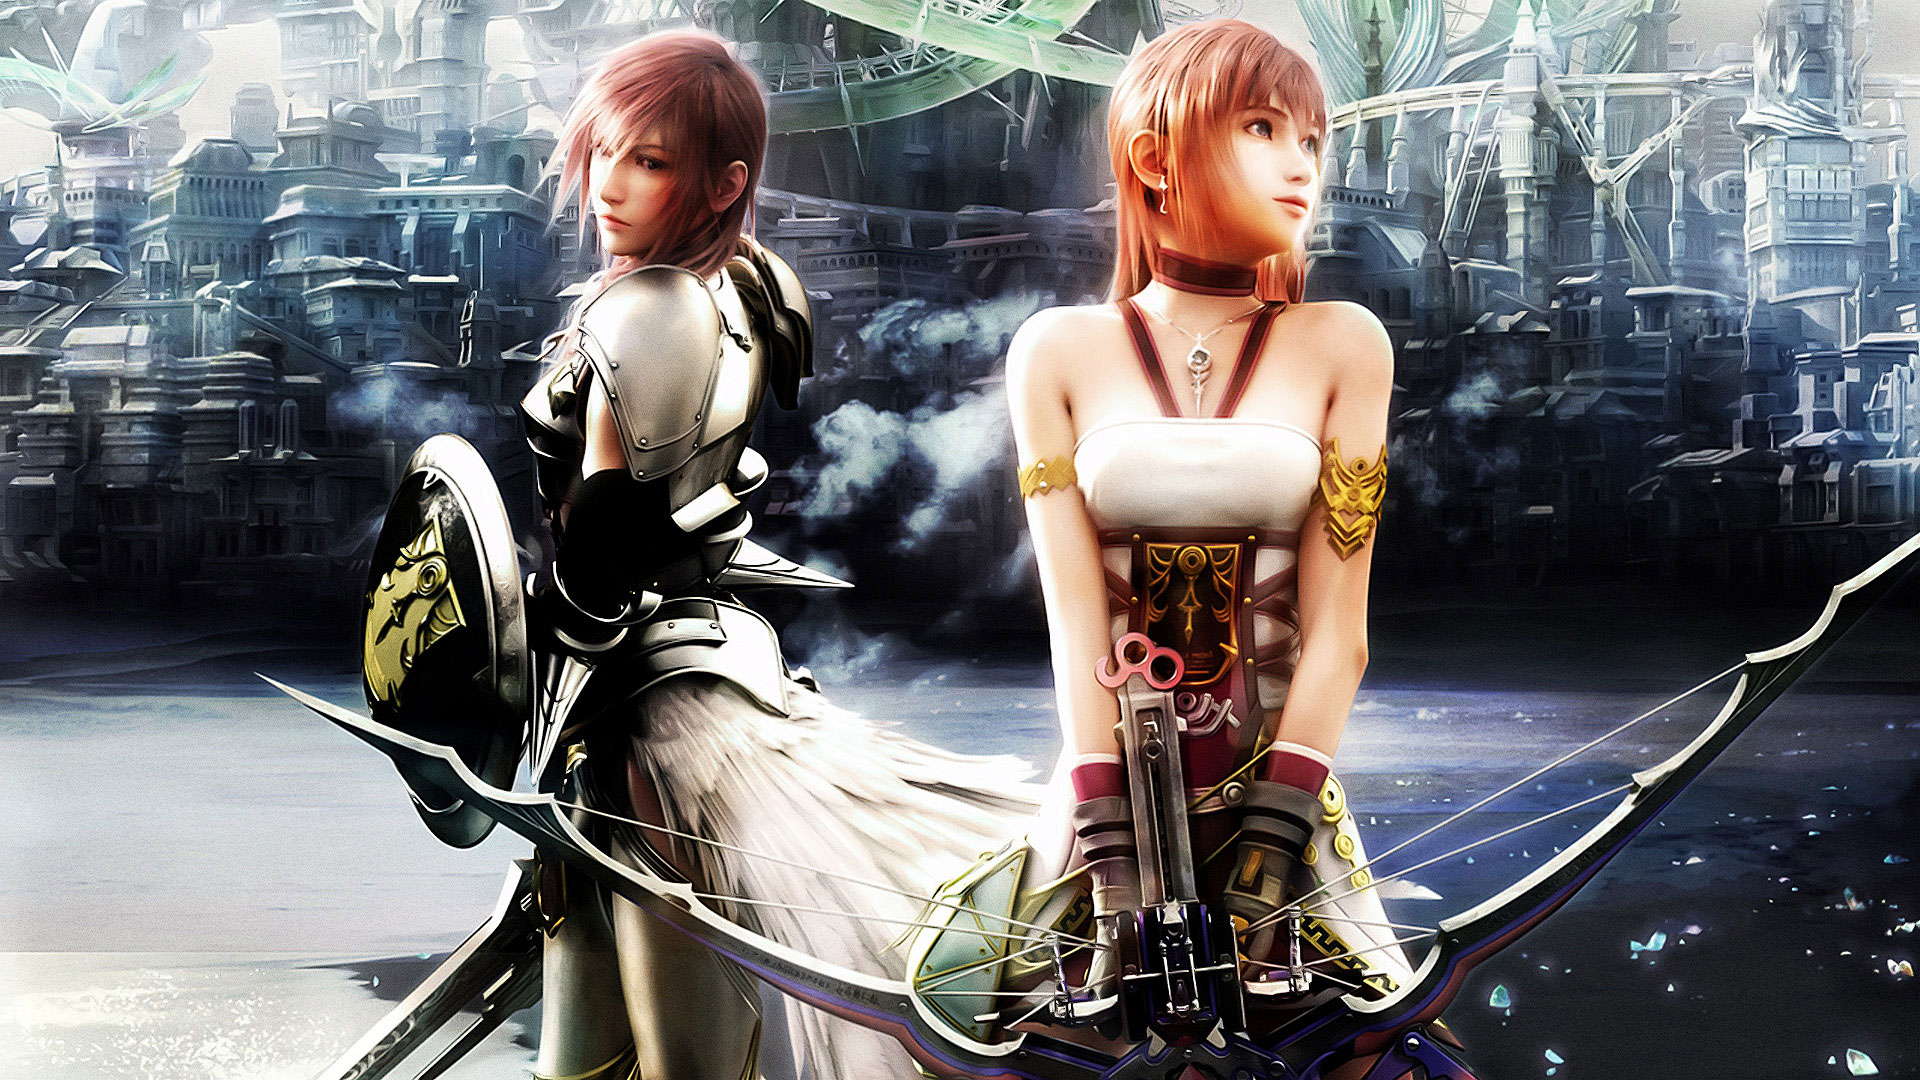 Final Fantasy XIII 2 Wallpapers in HD Page 2